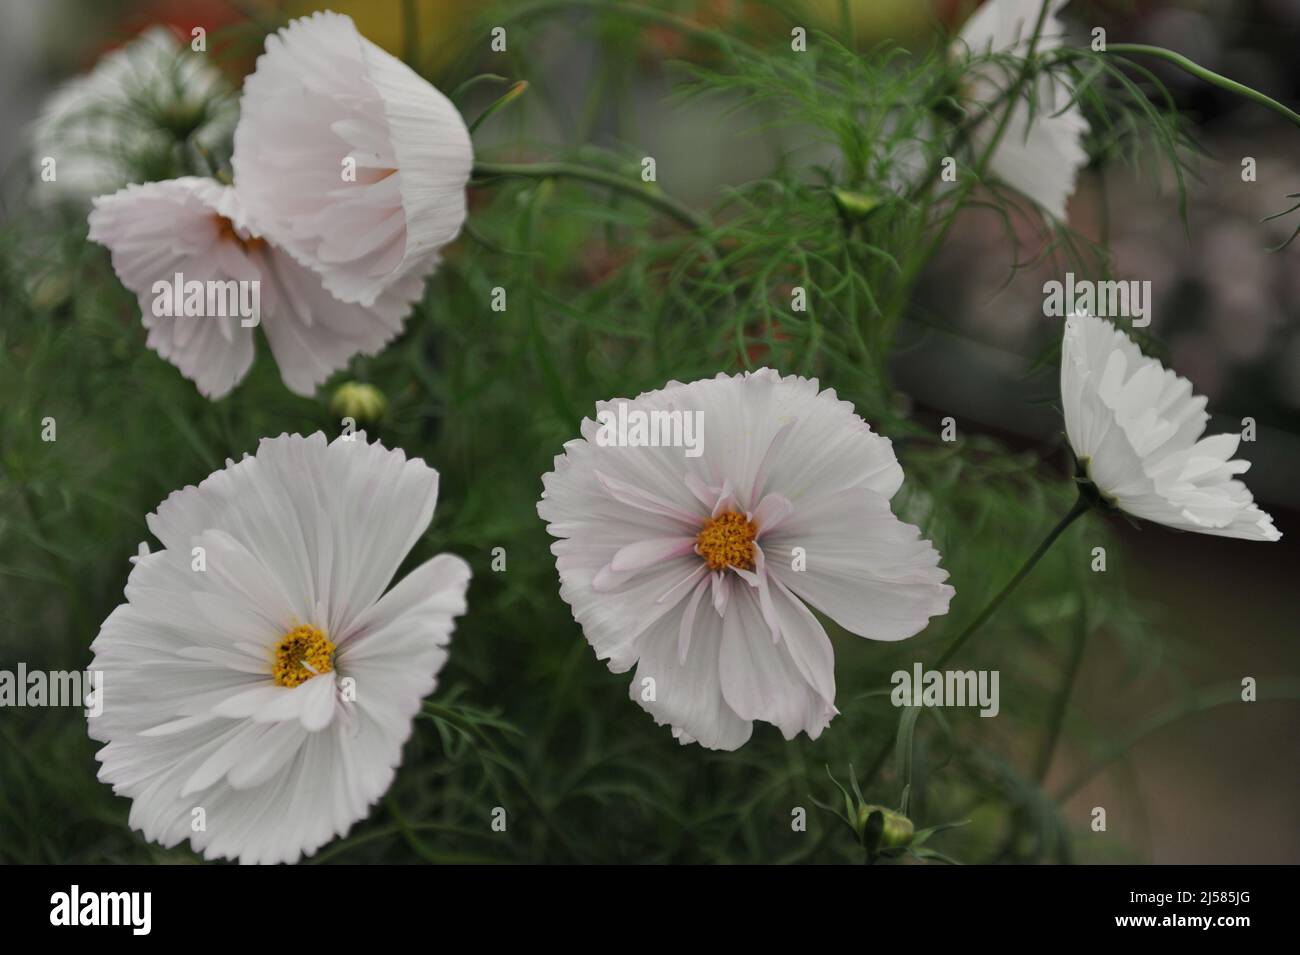 White semi-double cosmea (Cosmos bipinnatus) Cupcakes Blush blooms on an exhibition in May Stock Photo